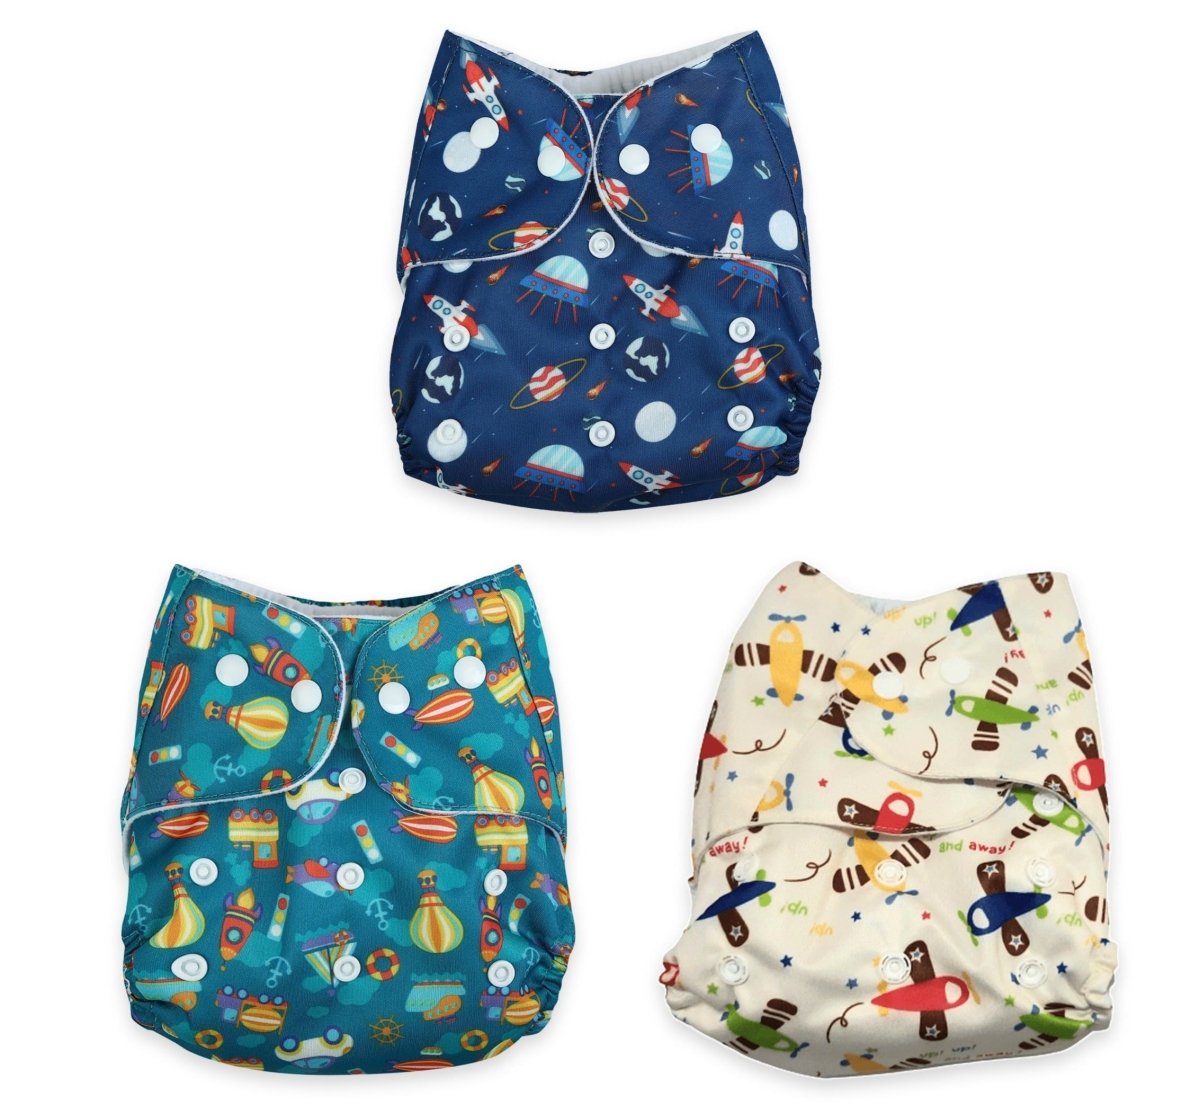 Combo of 3 Reusable Diapers- Option 12 - DPR-3-LOSC-3-3